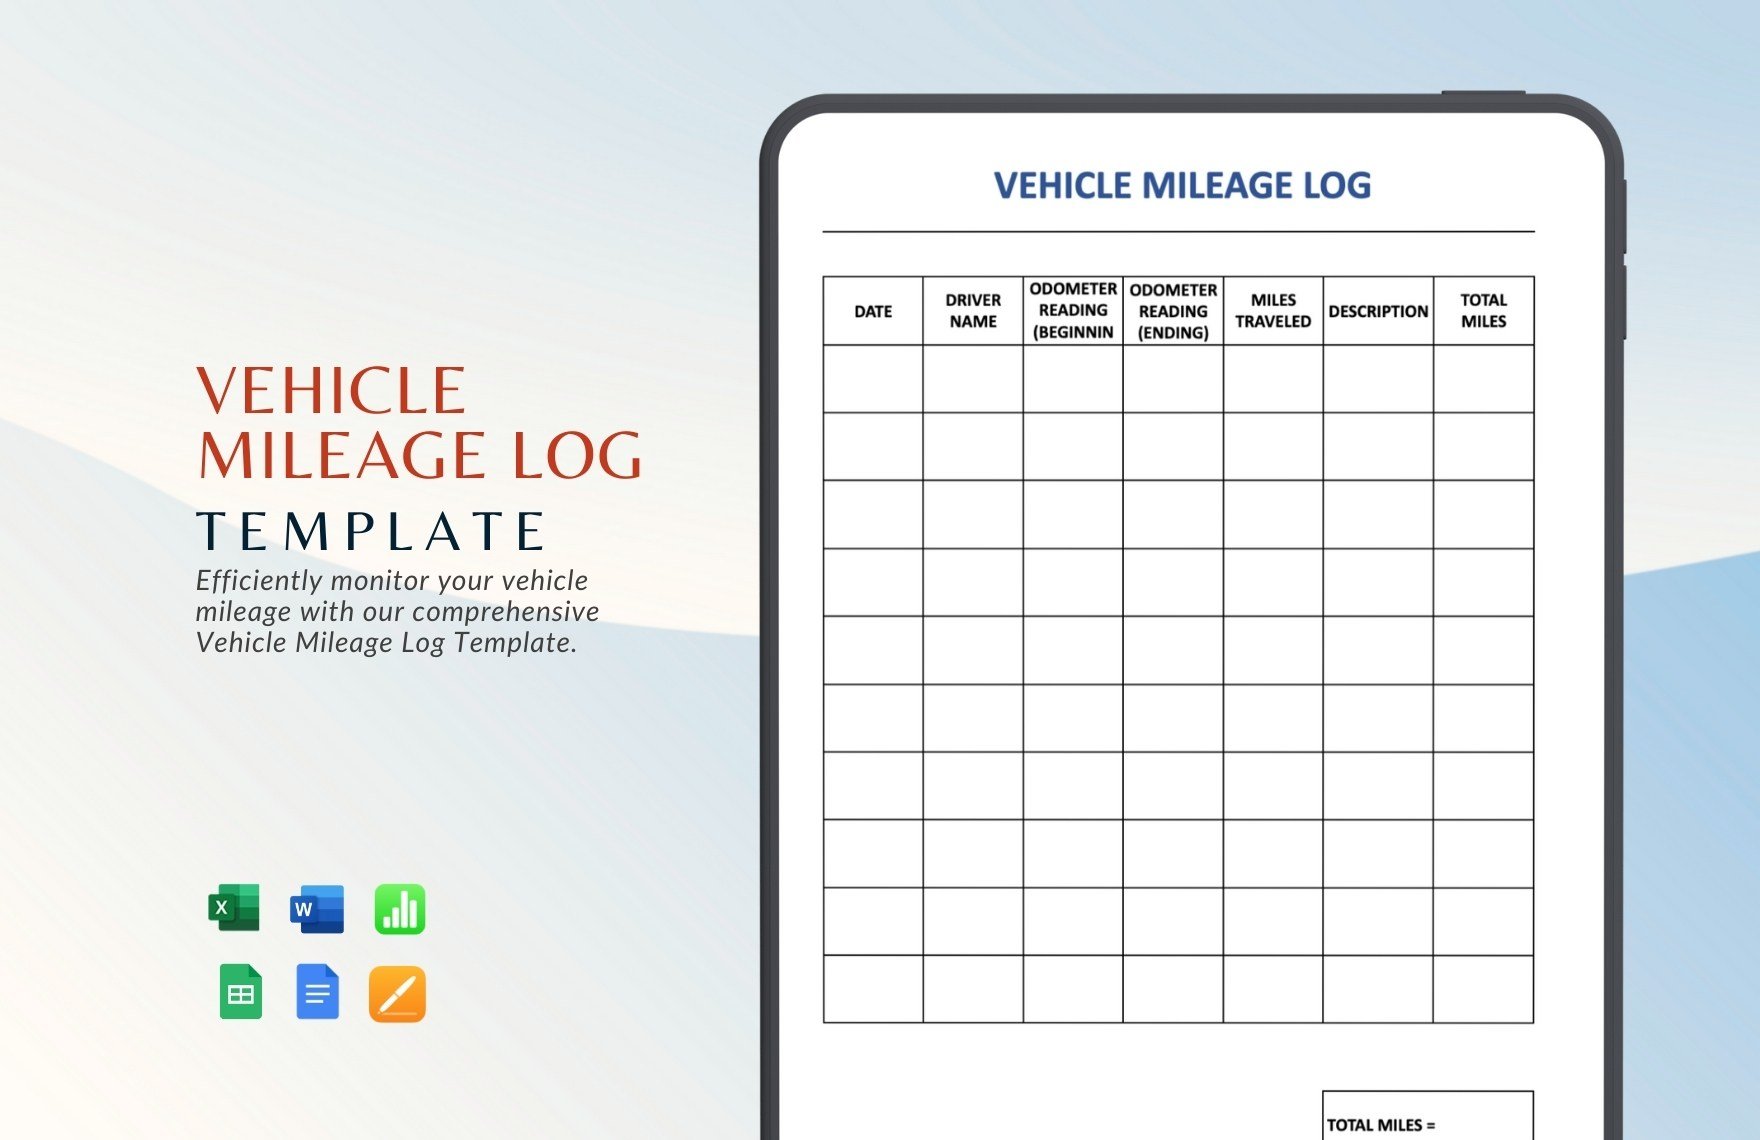 Vehicle Mileage Log Template in Word, Google Docs, Excel, Google Sheets, Apple Pages, Apple Numbers